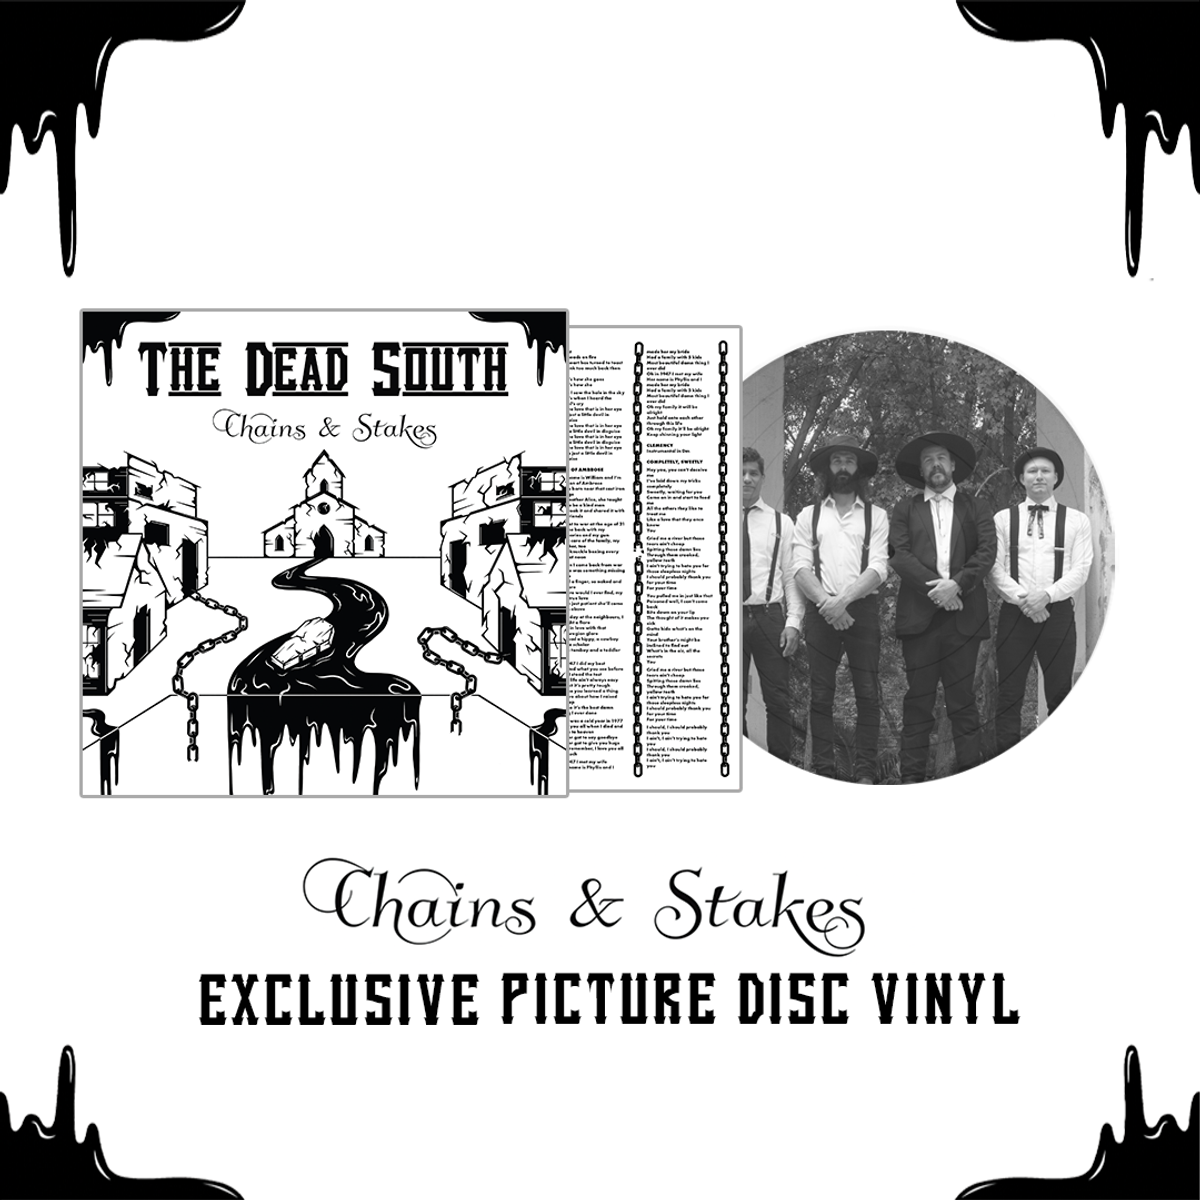 store.thedeadsouth.com